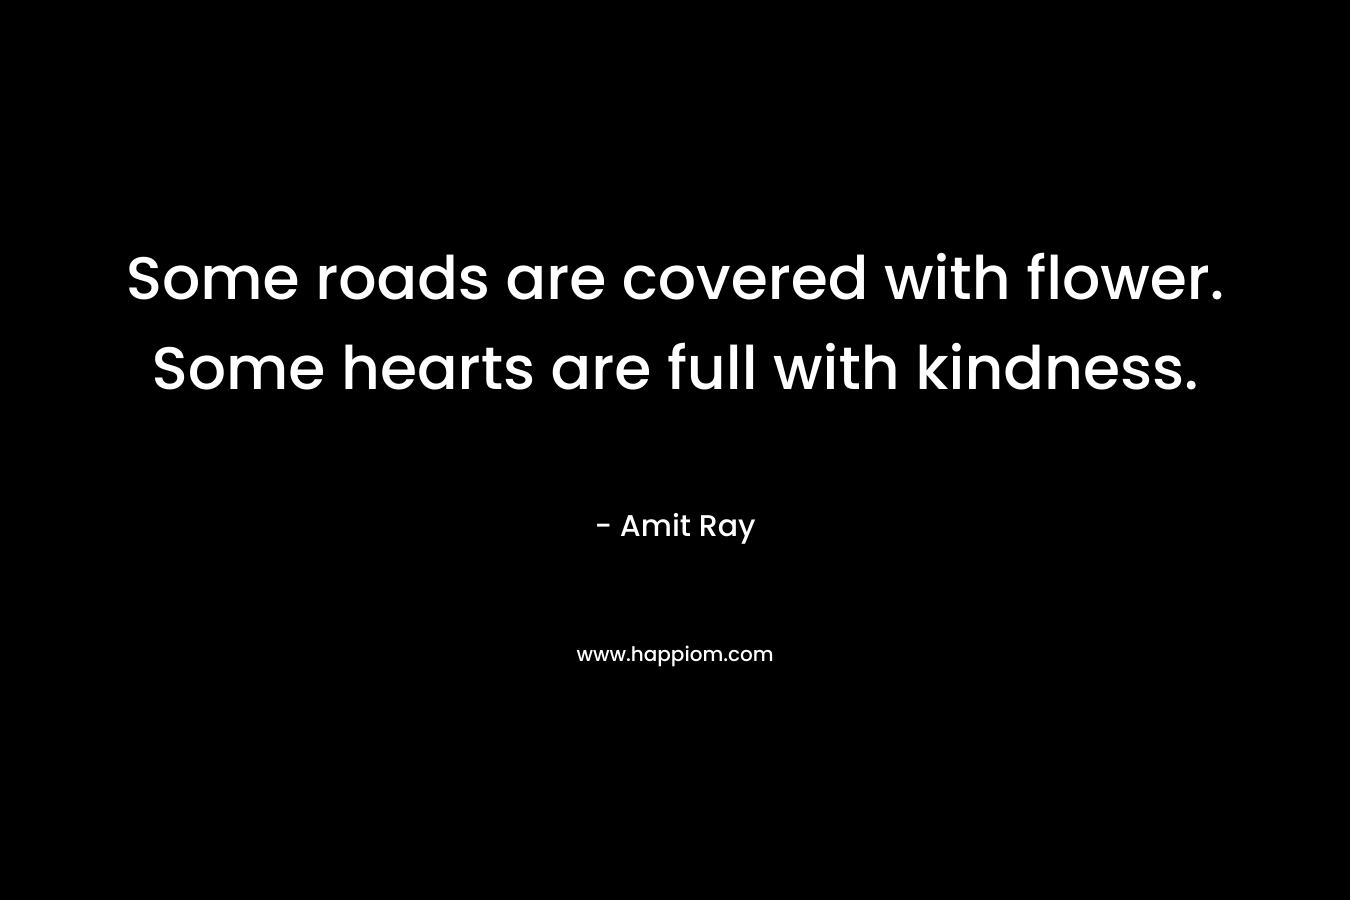 Some roads are covered with flower. Some hearts are full with kindness.